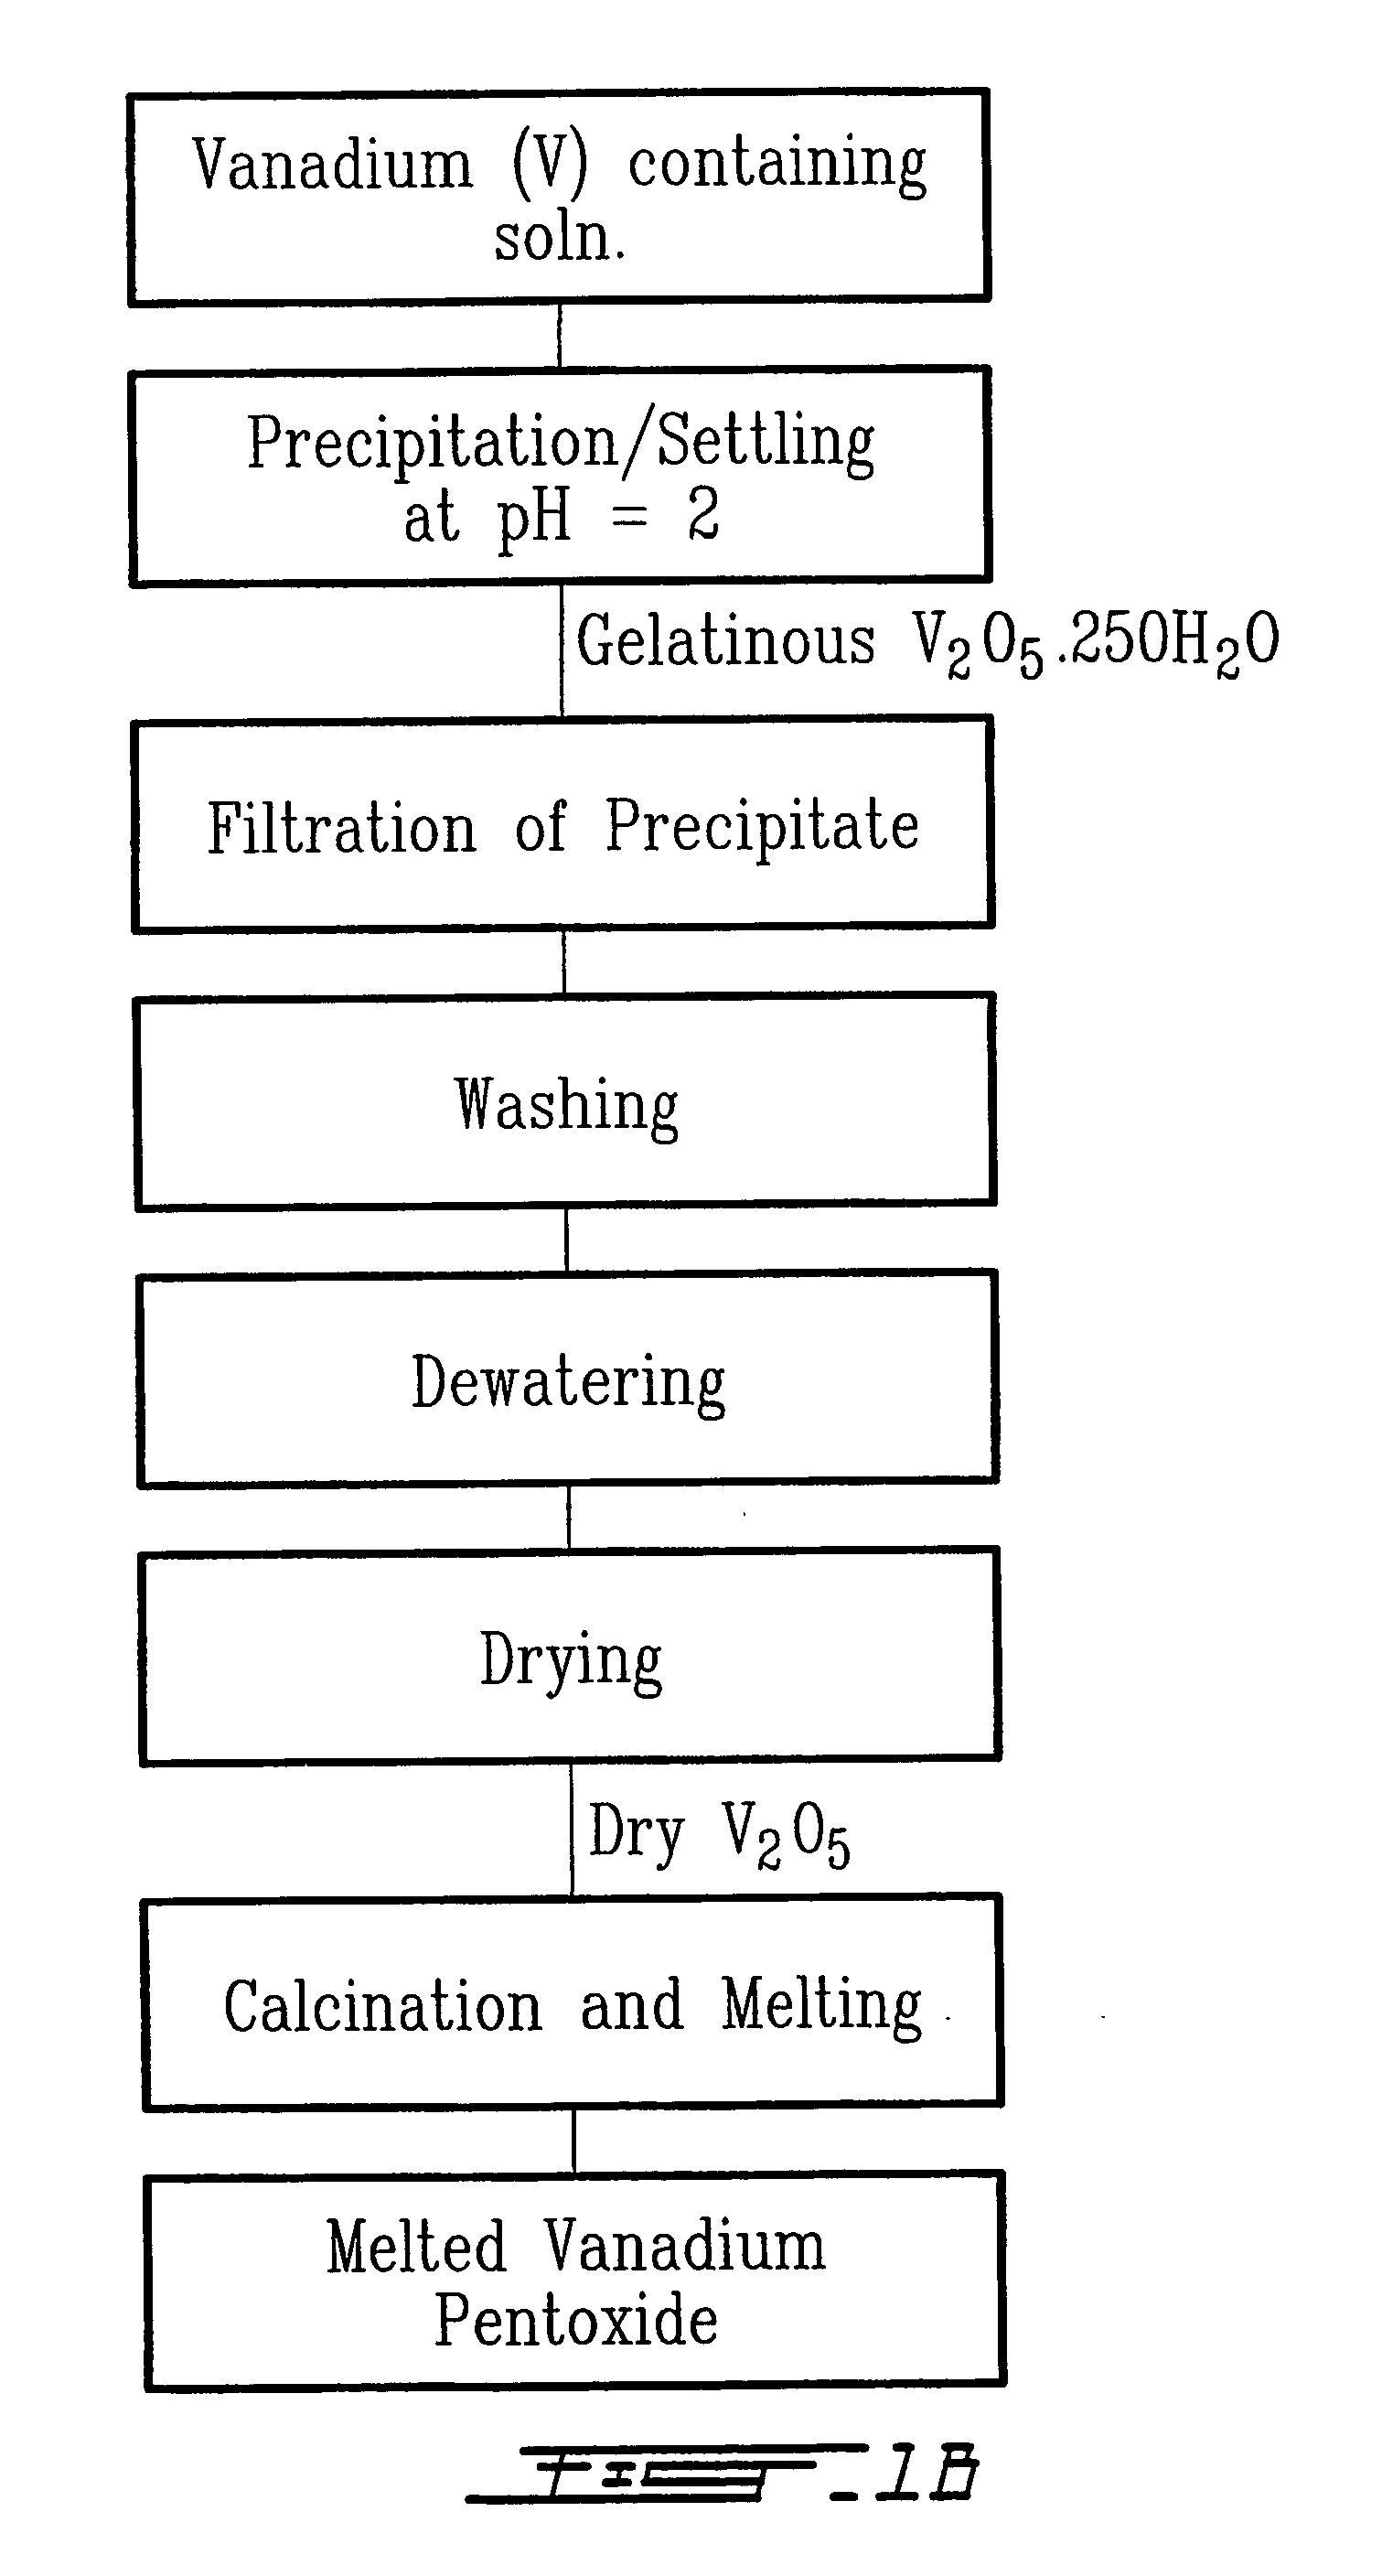 Method for recycling spent lithium metal polymer rechargeable batteries and related materials